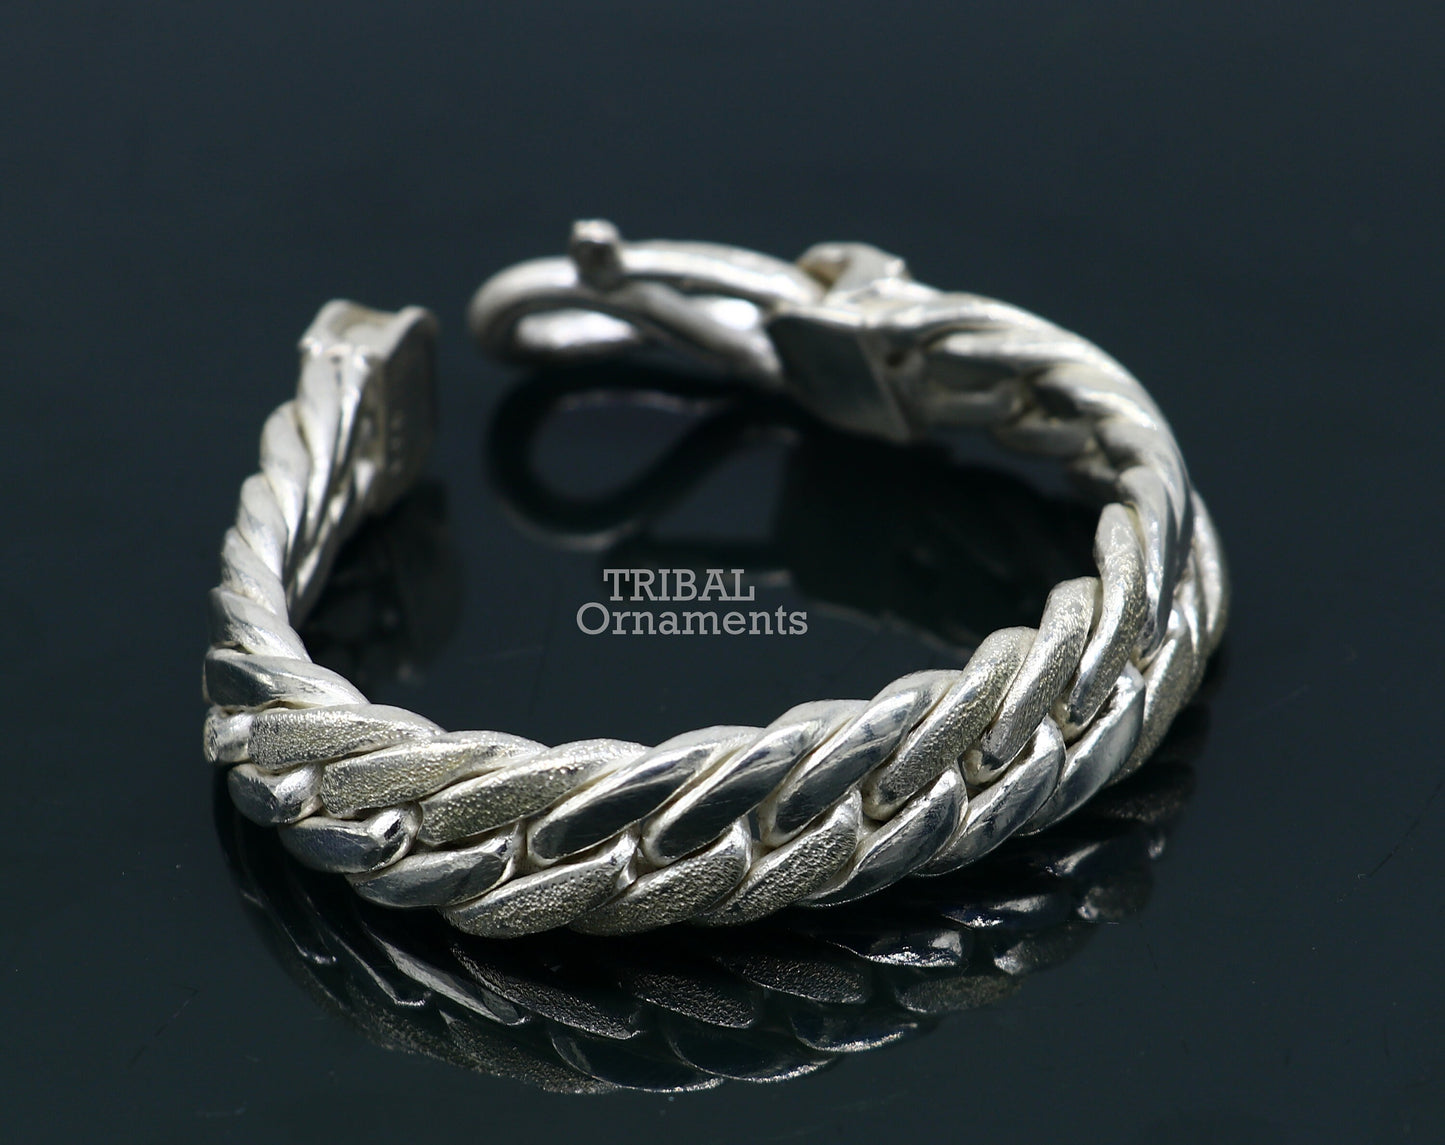 7" solid long Vintage antique Cuban link chain 925 sterling silver bracelet, excellent unisex gifting custom made jewelry from india sbr375 - TRIBAL ORNAMENTS